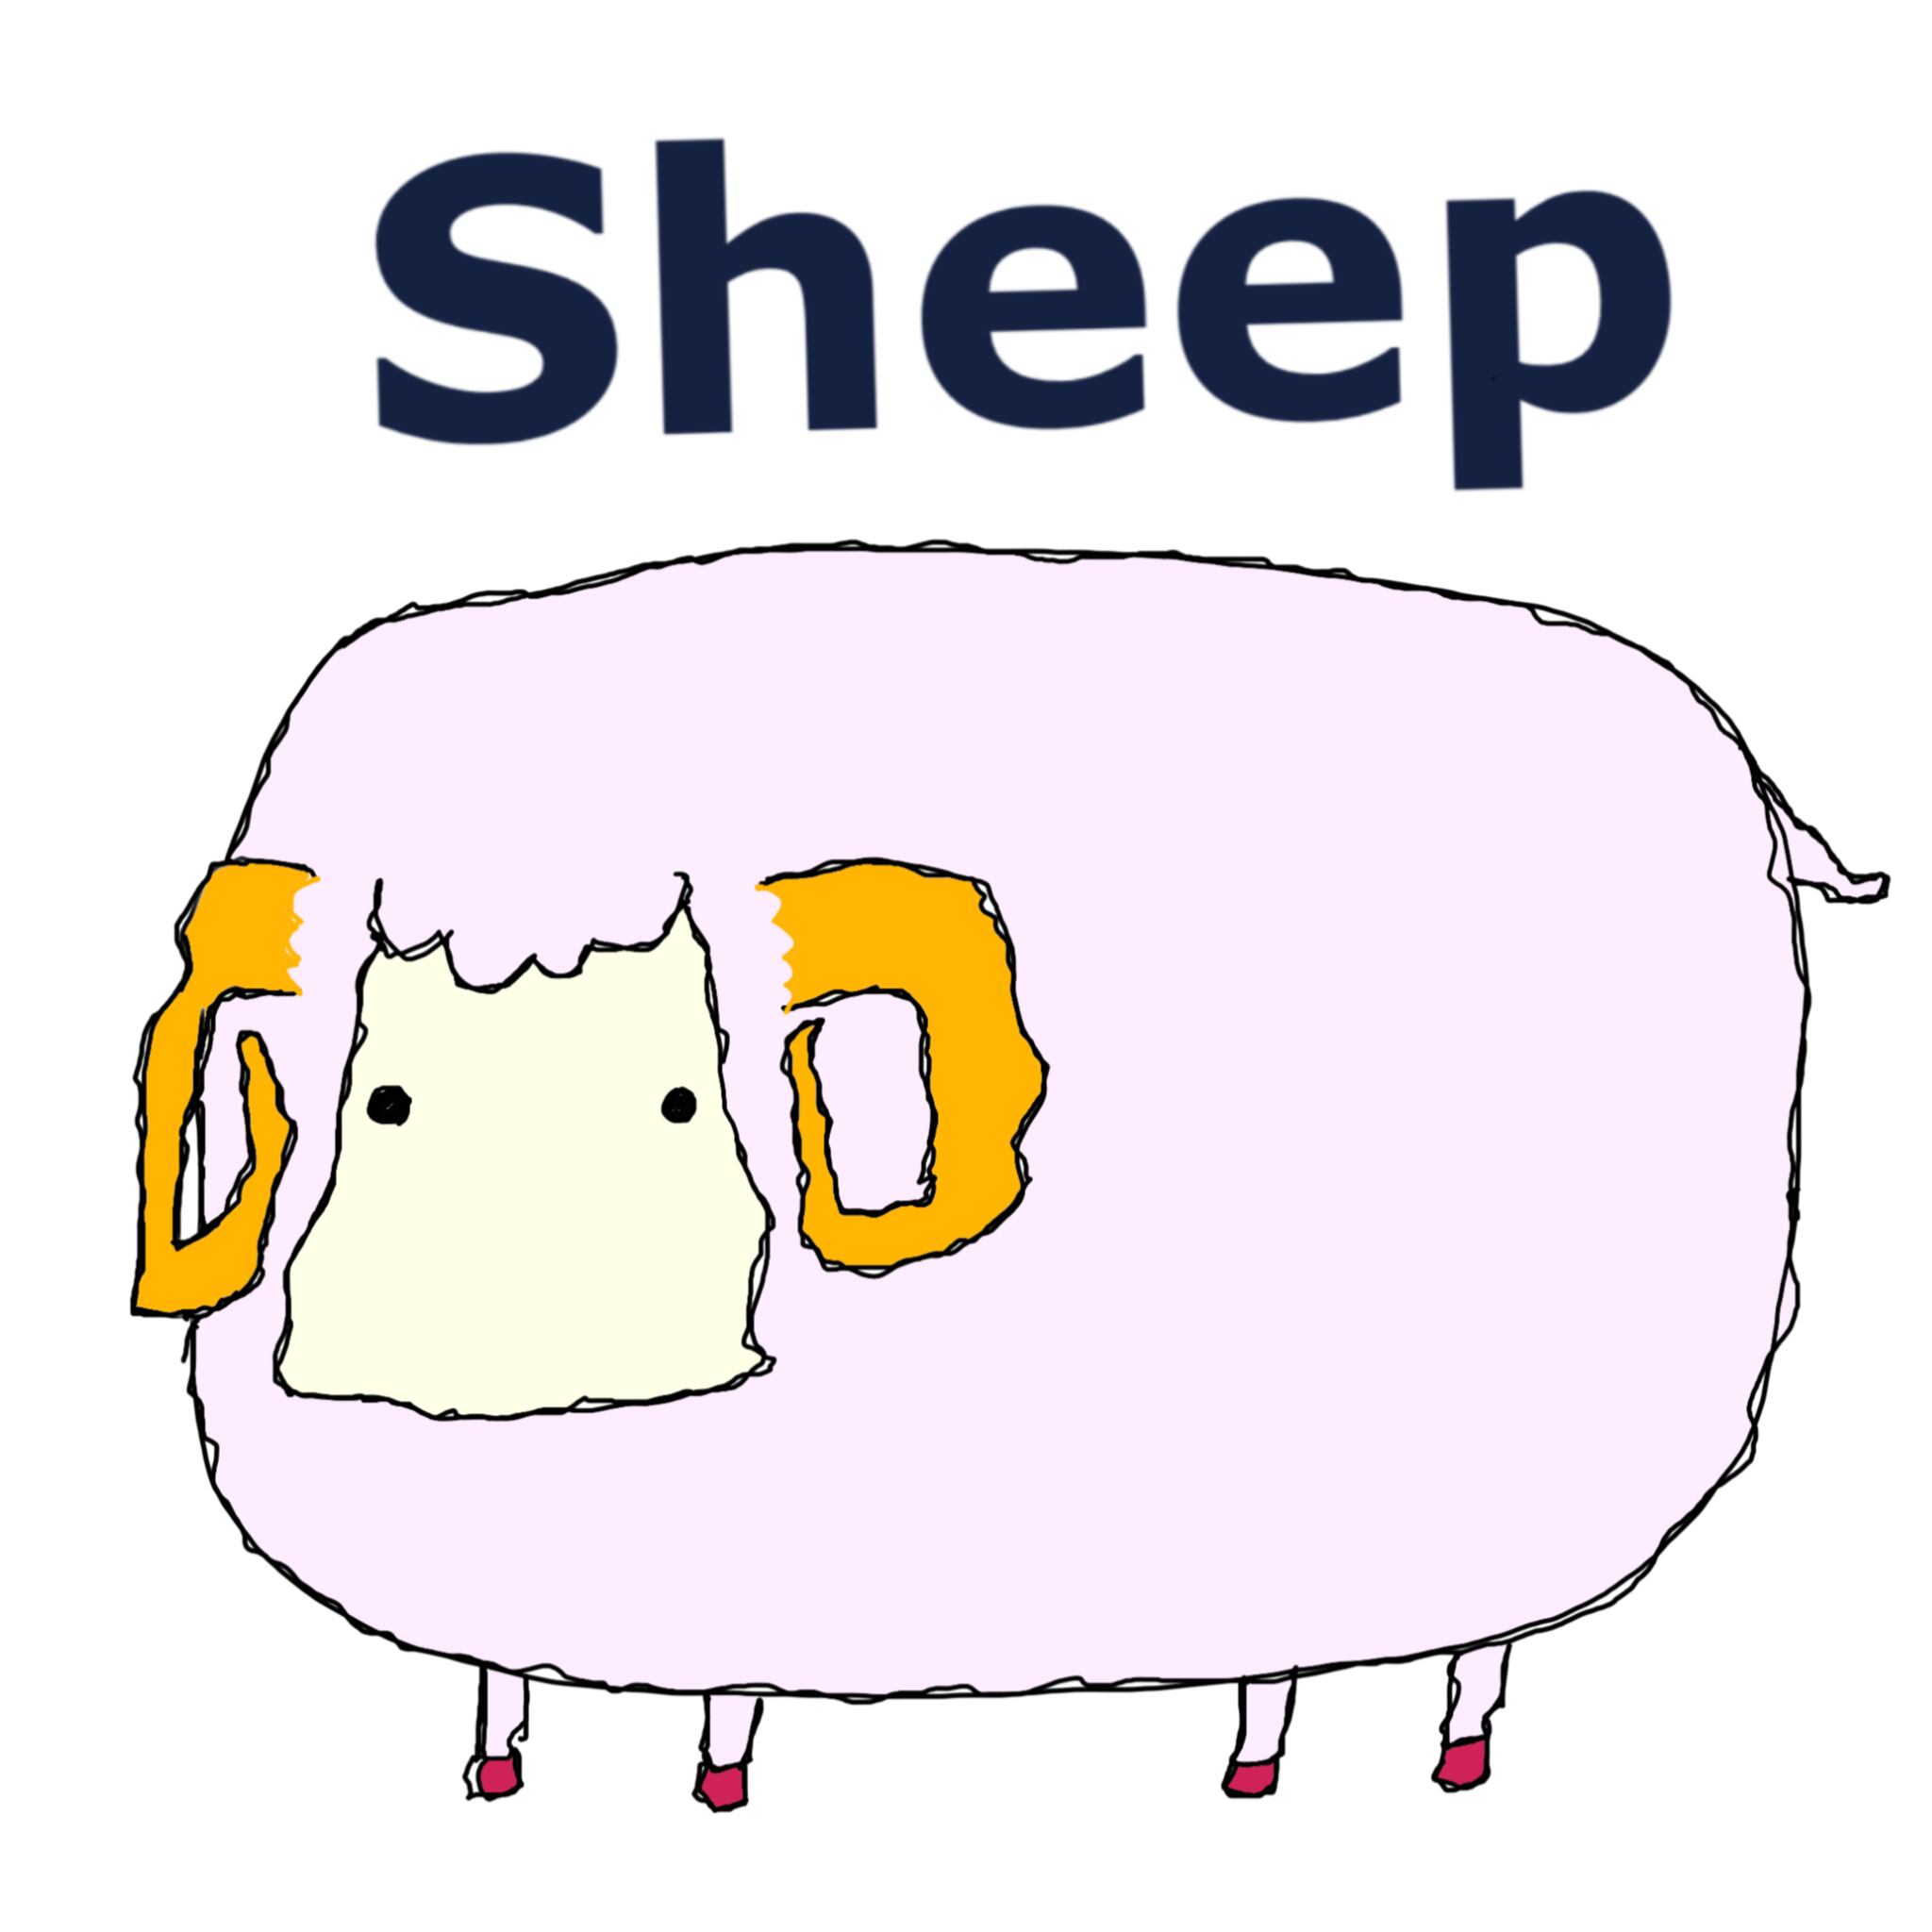 sheepest